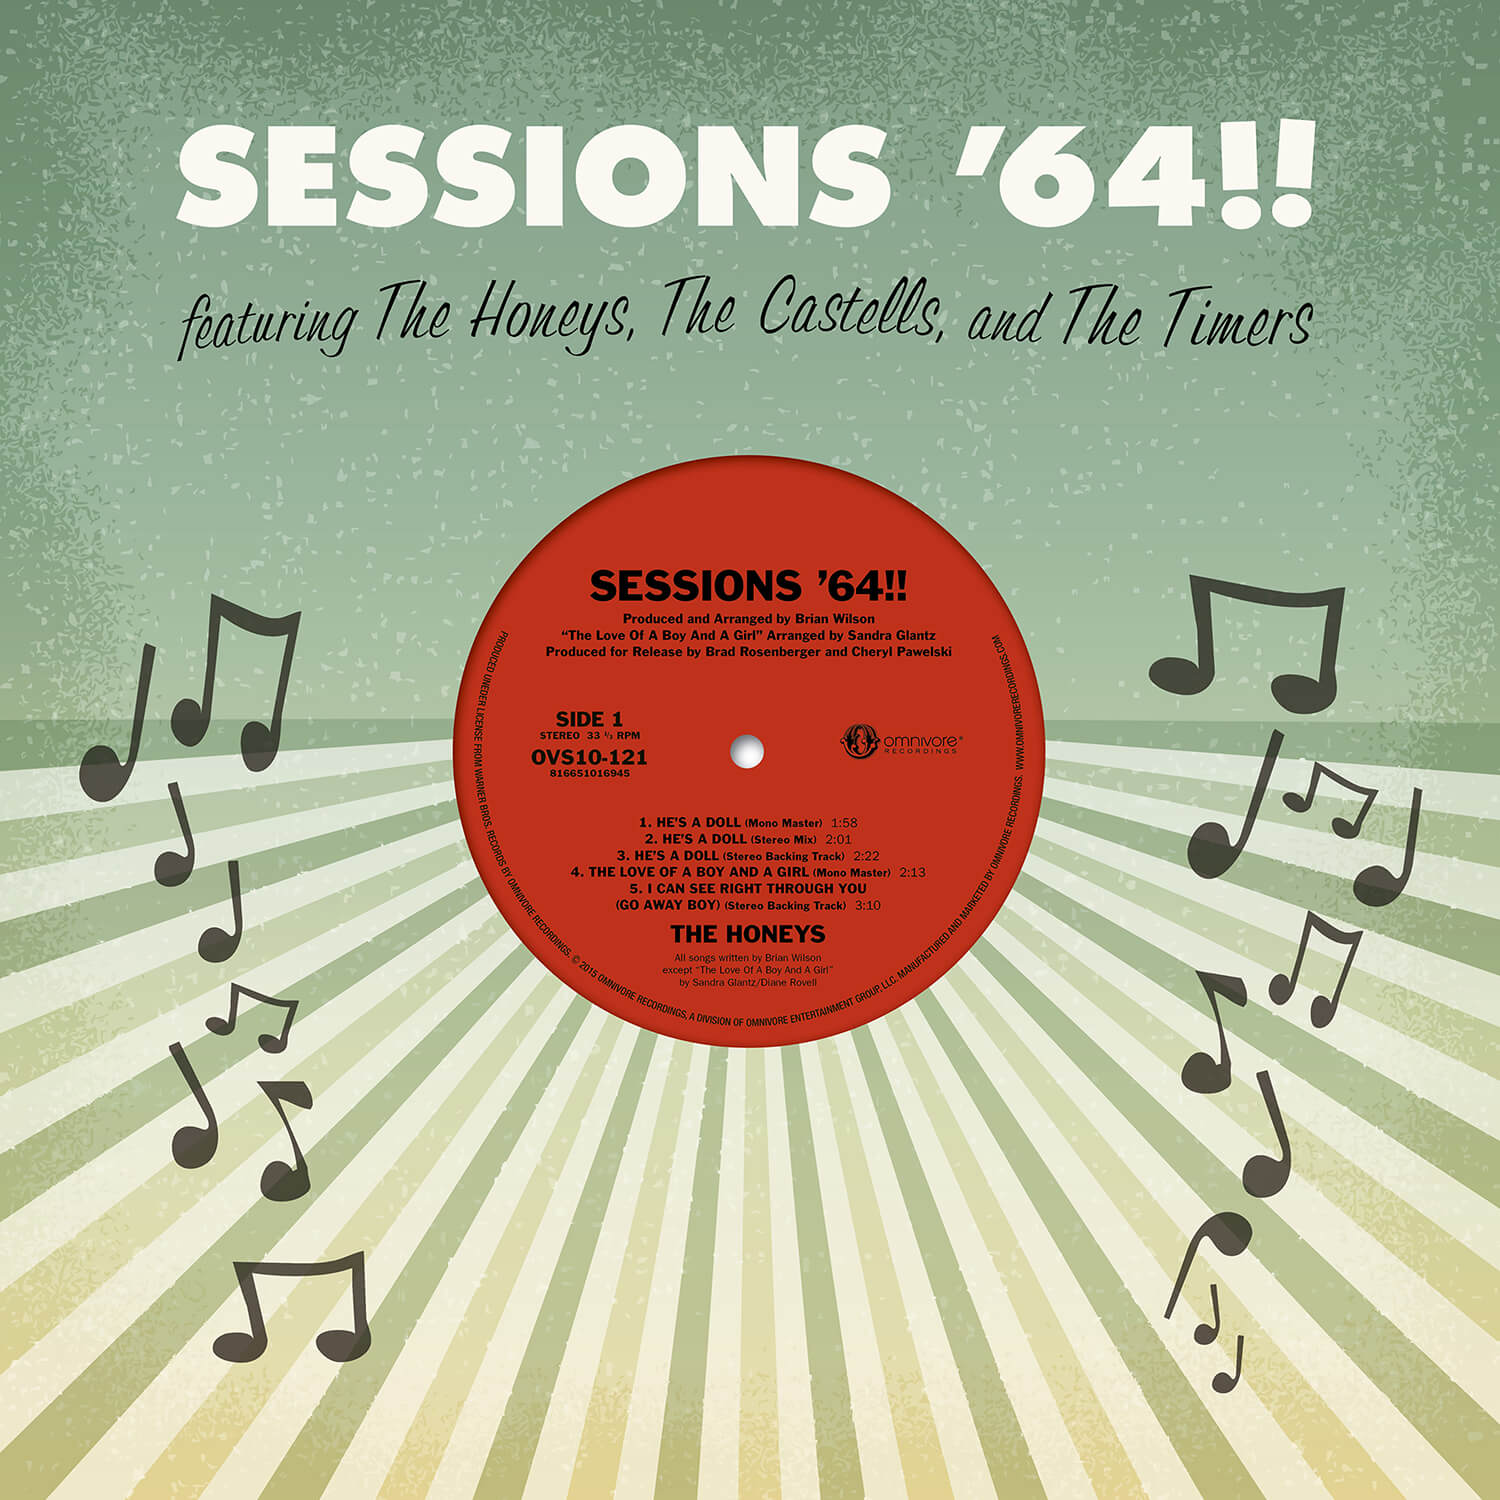 Sessions ‘64!!